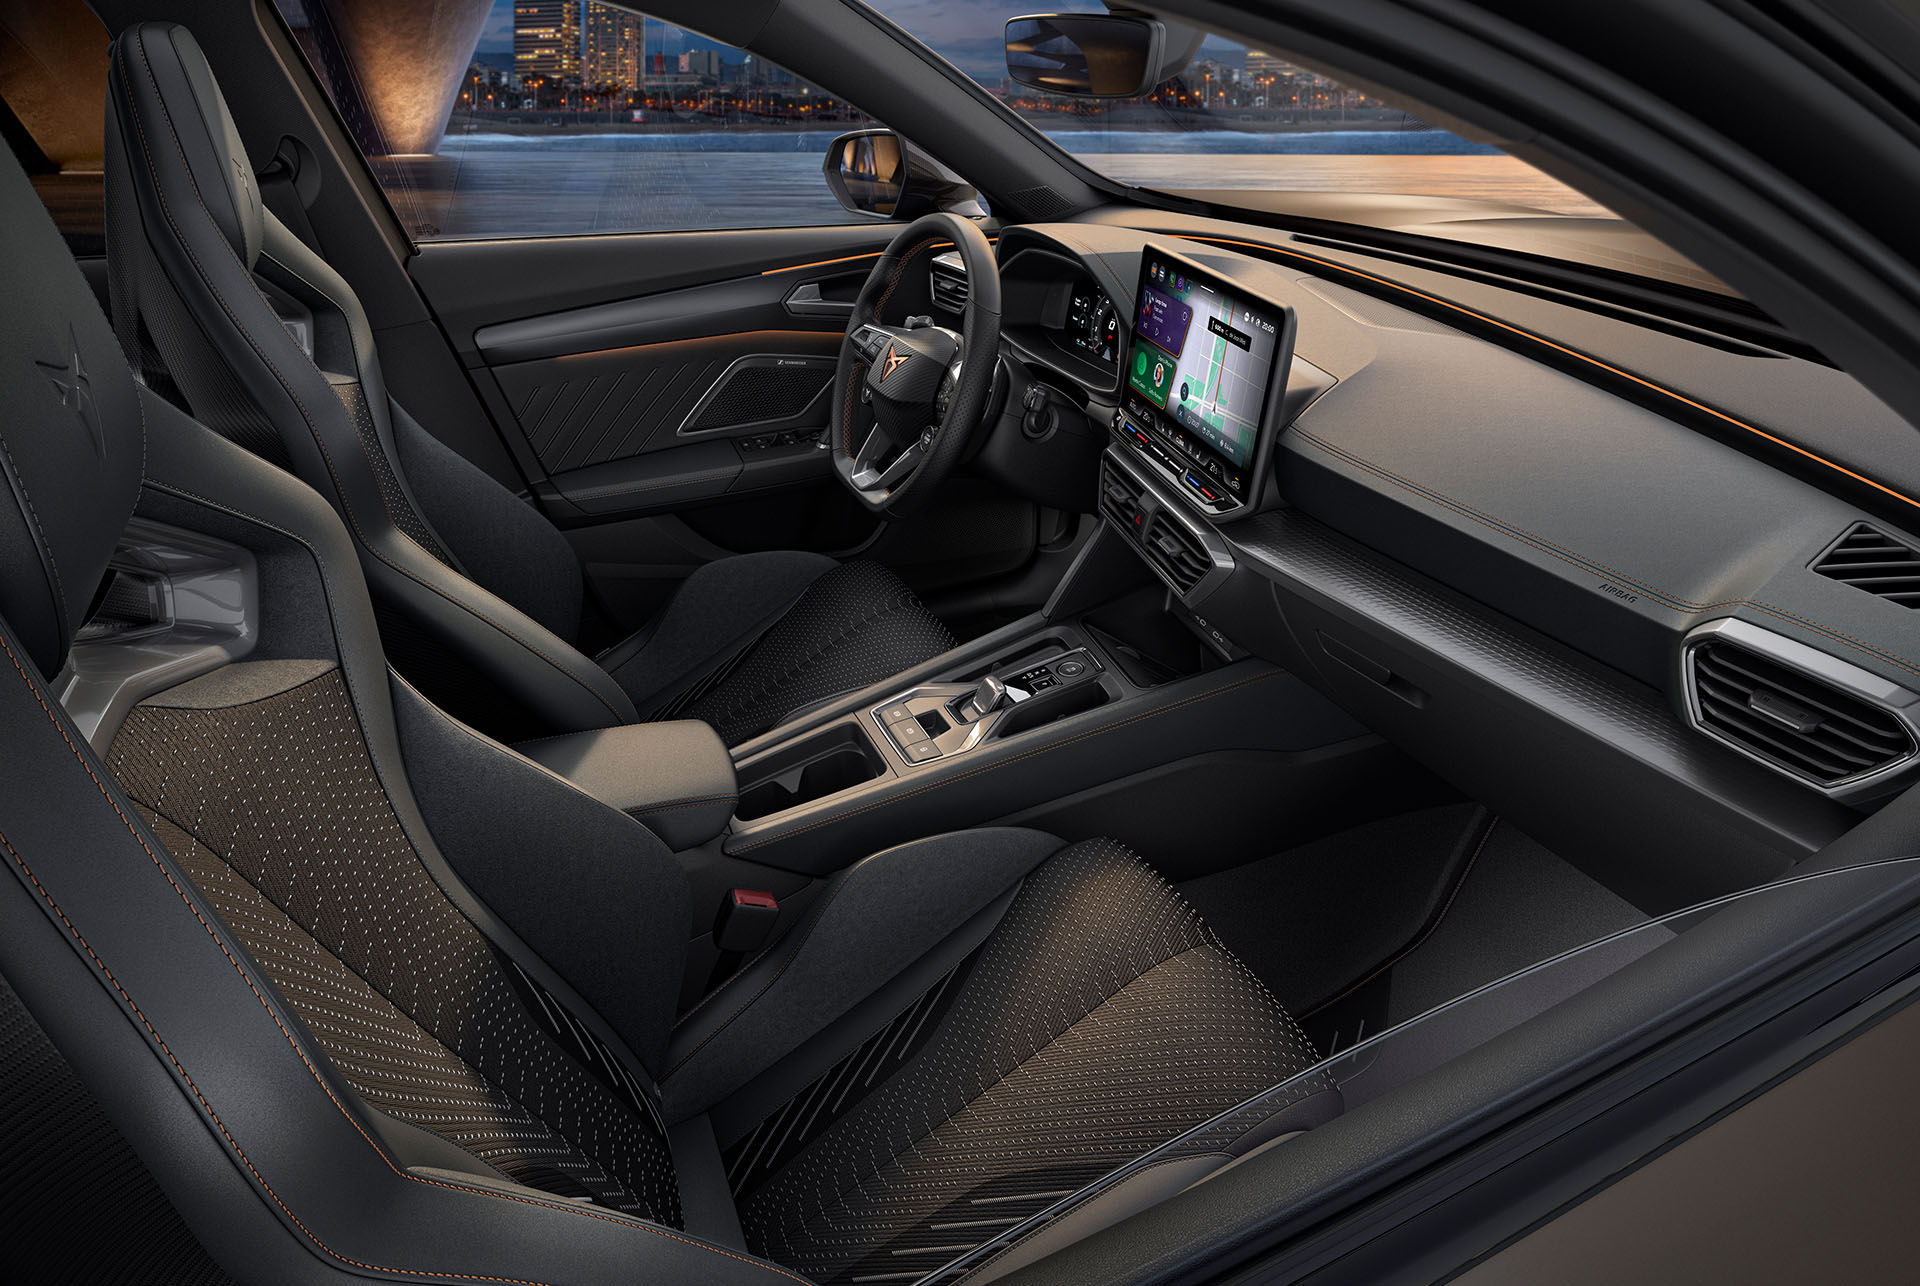 Interior view of the new CUPRA Formentor’s cockpit. The cabin features black bucket seats, copper accents and stitching, the infotainment system and a steering wheel with the CUPRA logo.